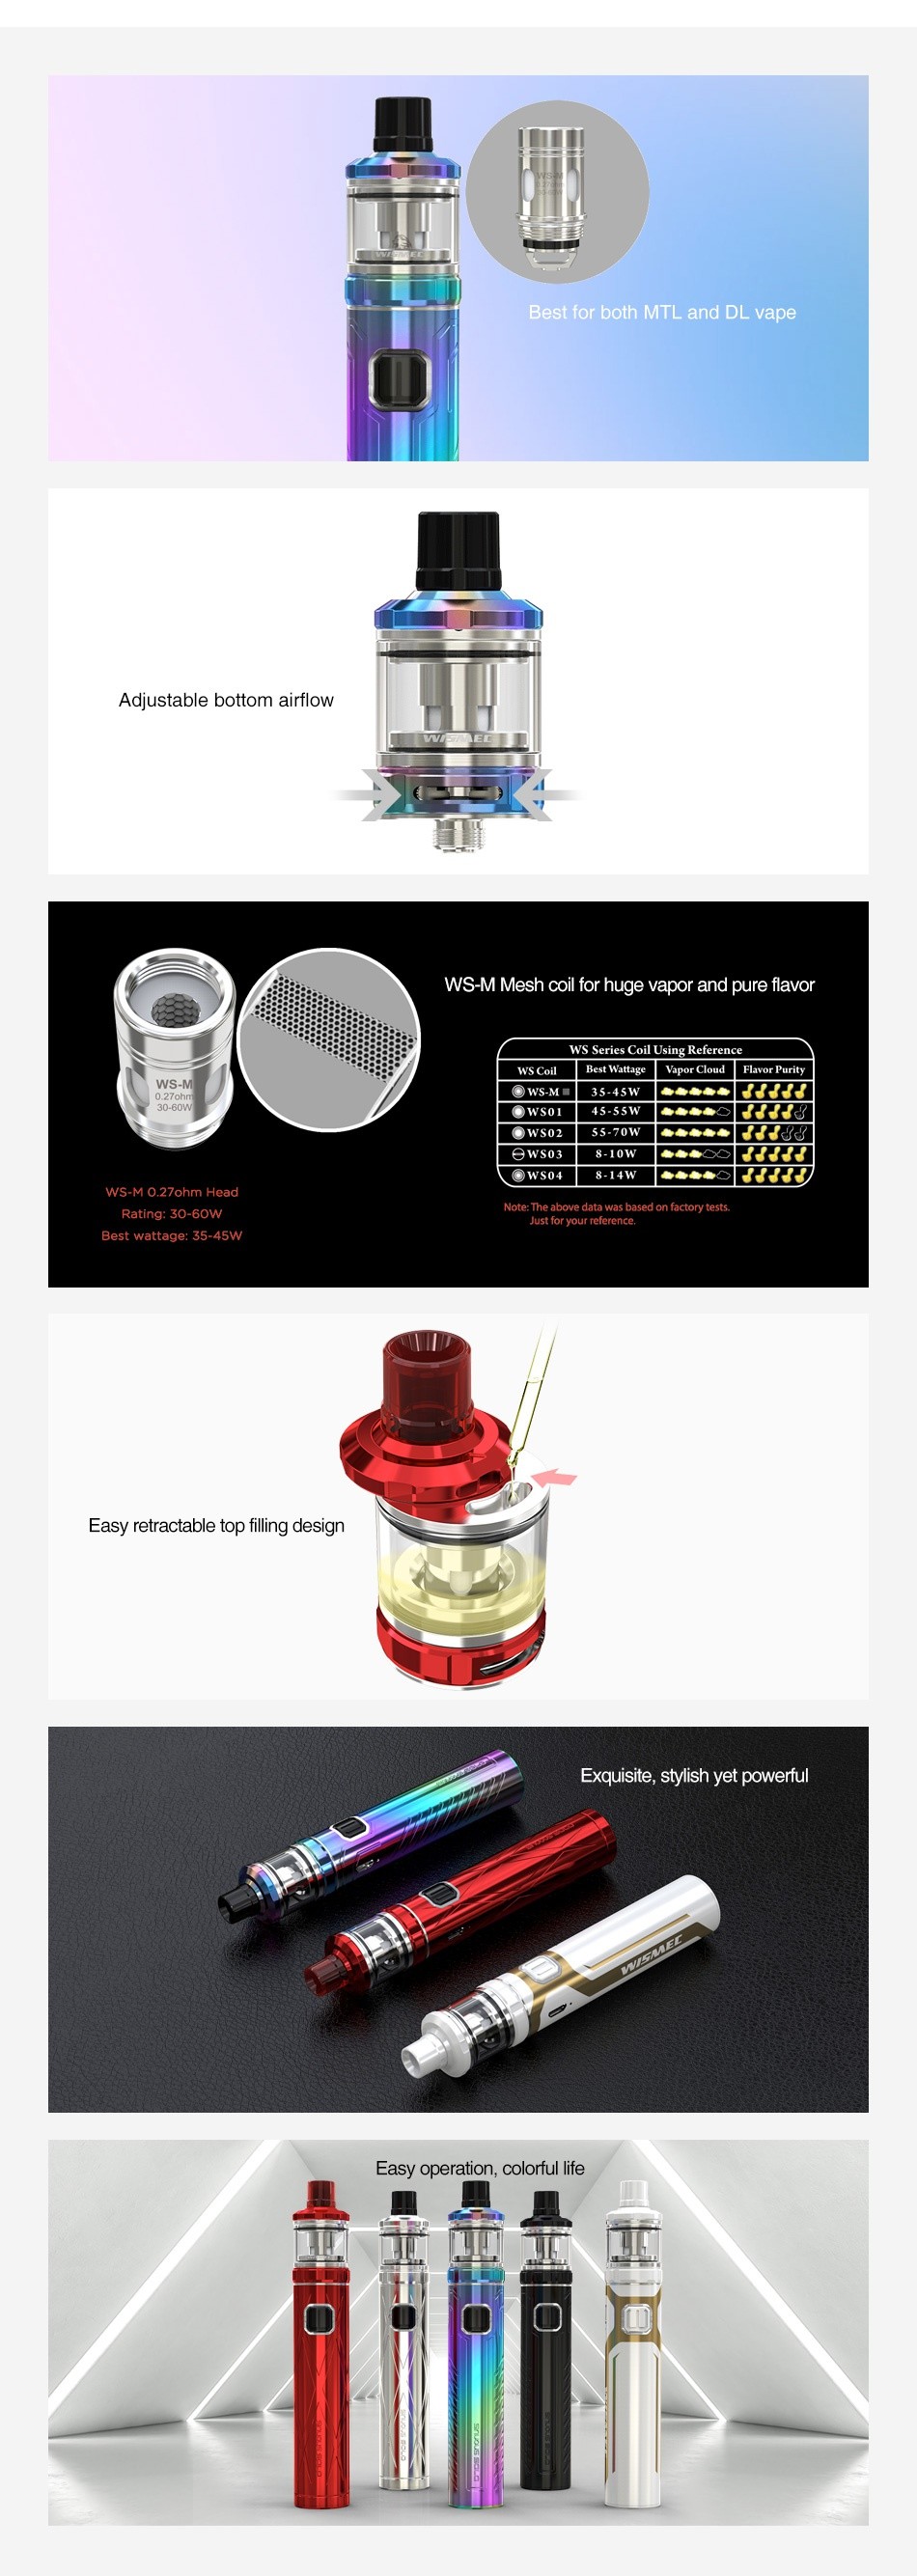 WISMEC SINUOUS Solo Starter Kit with Amor NS Pro 2300mAh Best for both MTL and DL vape Adjustable bottom airflow WS M Mesh coil for huge vapor and pure flavor EIWS Ma 35 45w vS0145 55   w50255 70W  wS Md o  27uhun Head Ratine  30 60w est wattage  35 45w Easy retractable top hilling design Exquisite  stylish yet powerful Easy operation  colorful lile